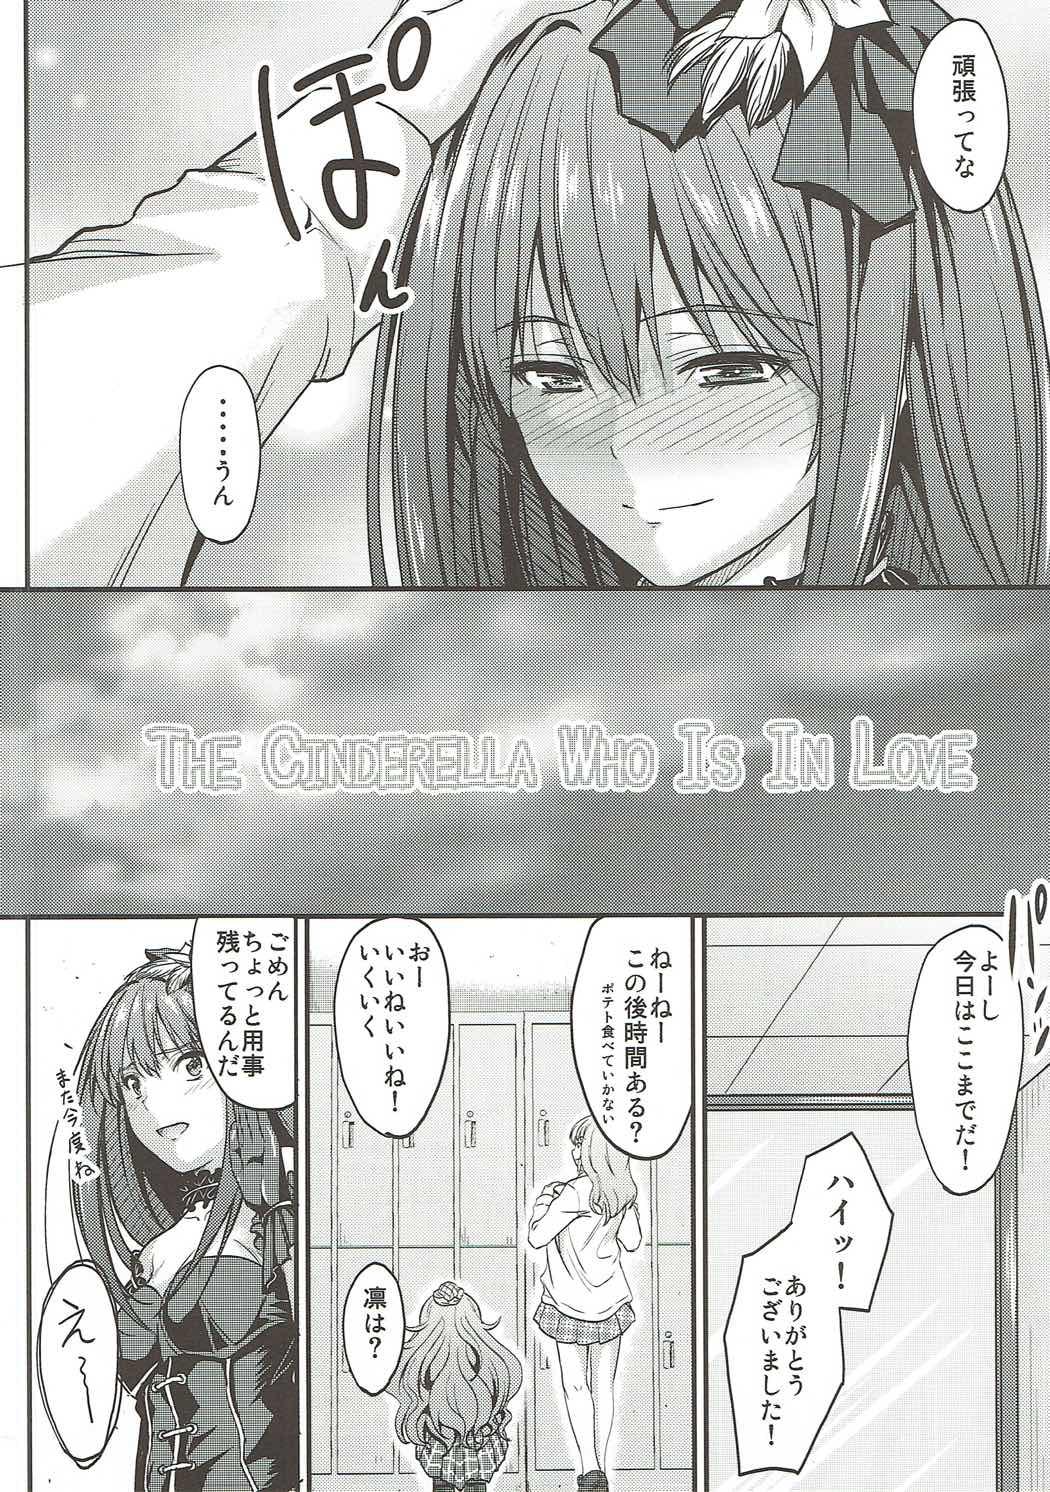 Moneytalks THE CINDERELLA WHO IS IN LOVE - The idolmaster Nudity - Page 3